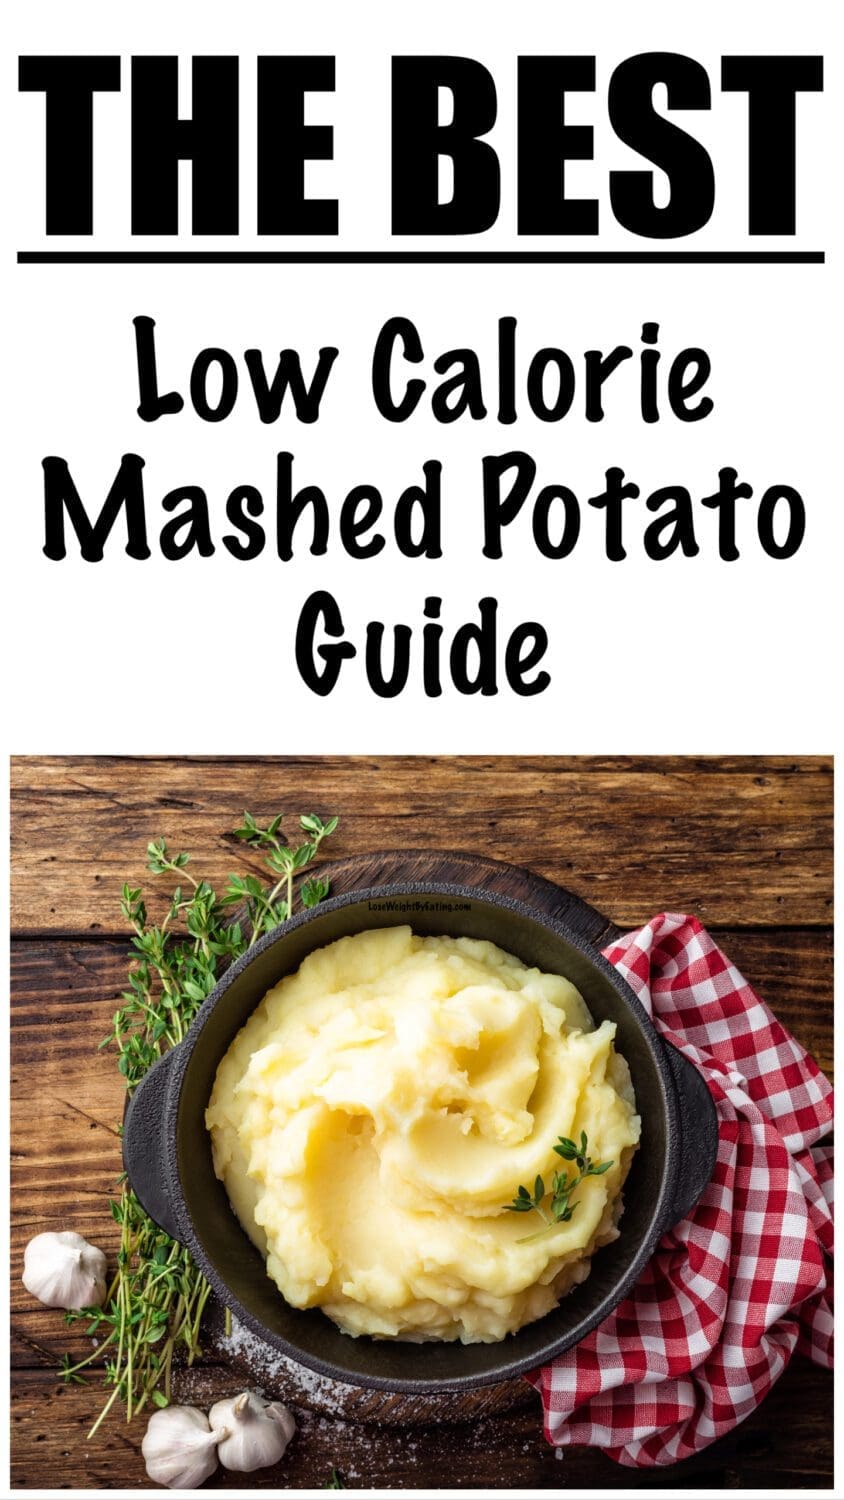 Calories in Mashed Potatoes